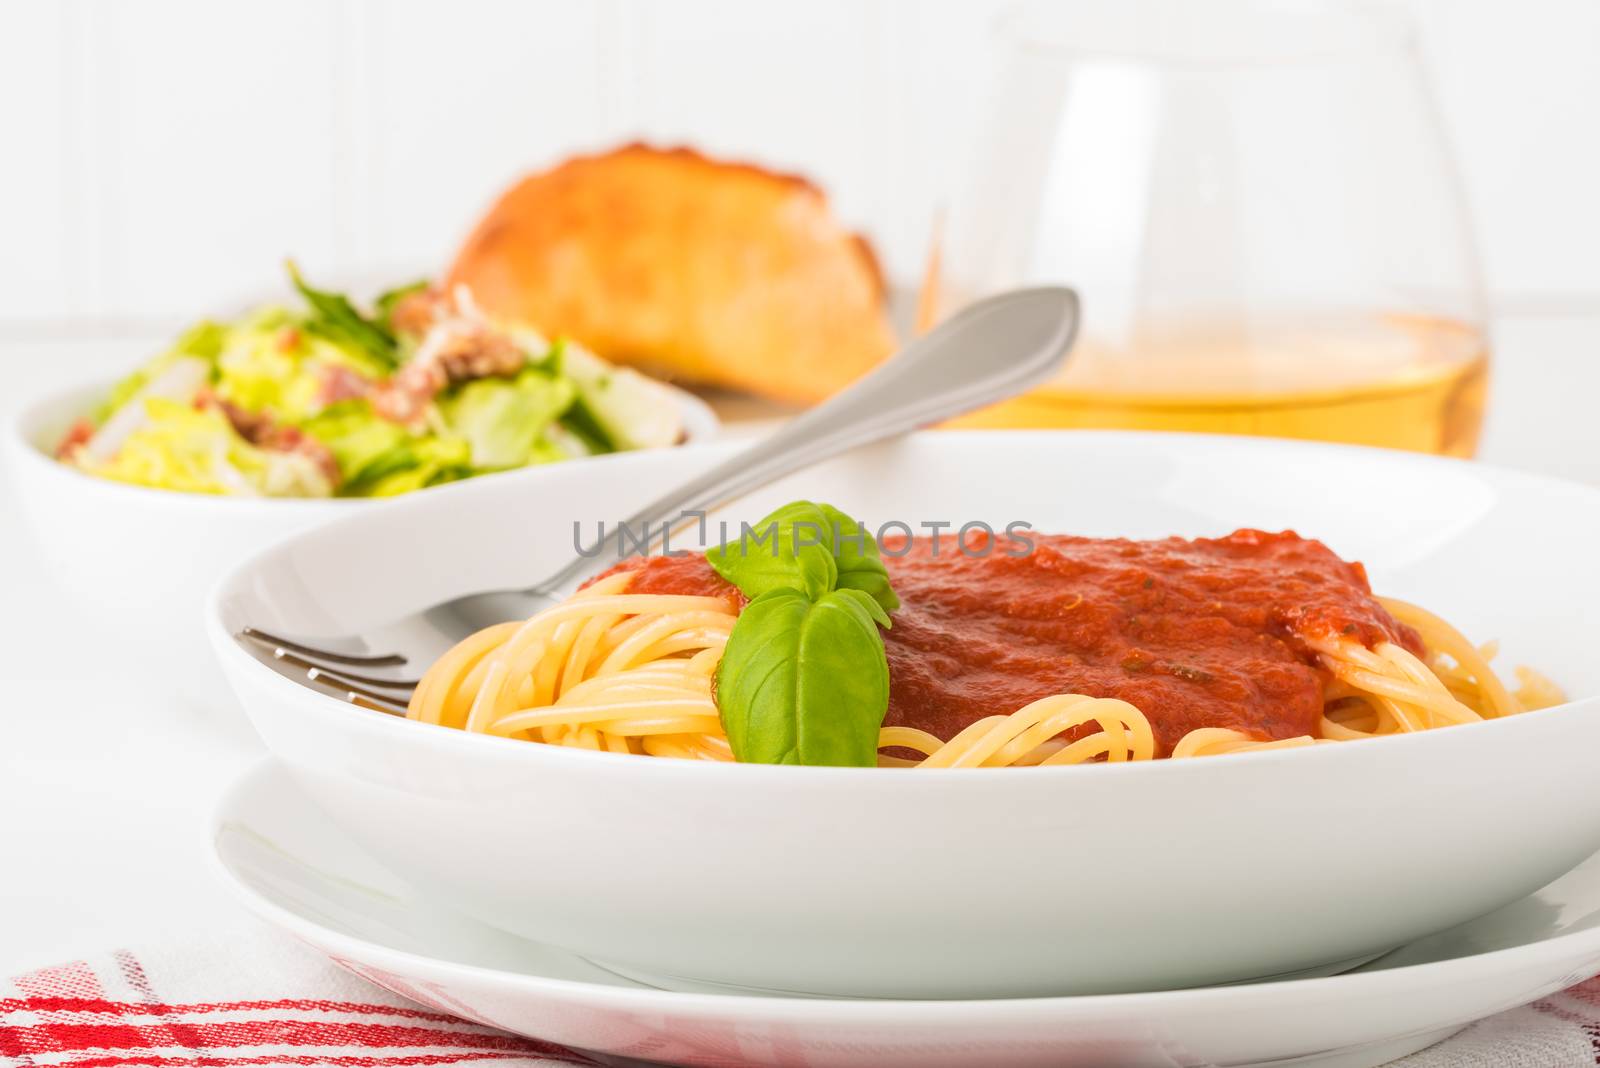 Bowl of spaghetti with tomato sauce.  Useful for menus or other food service applications.